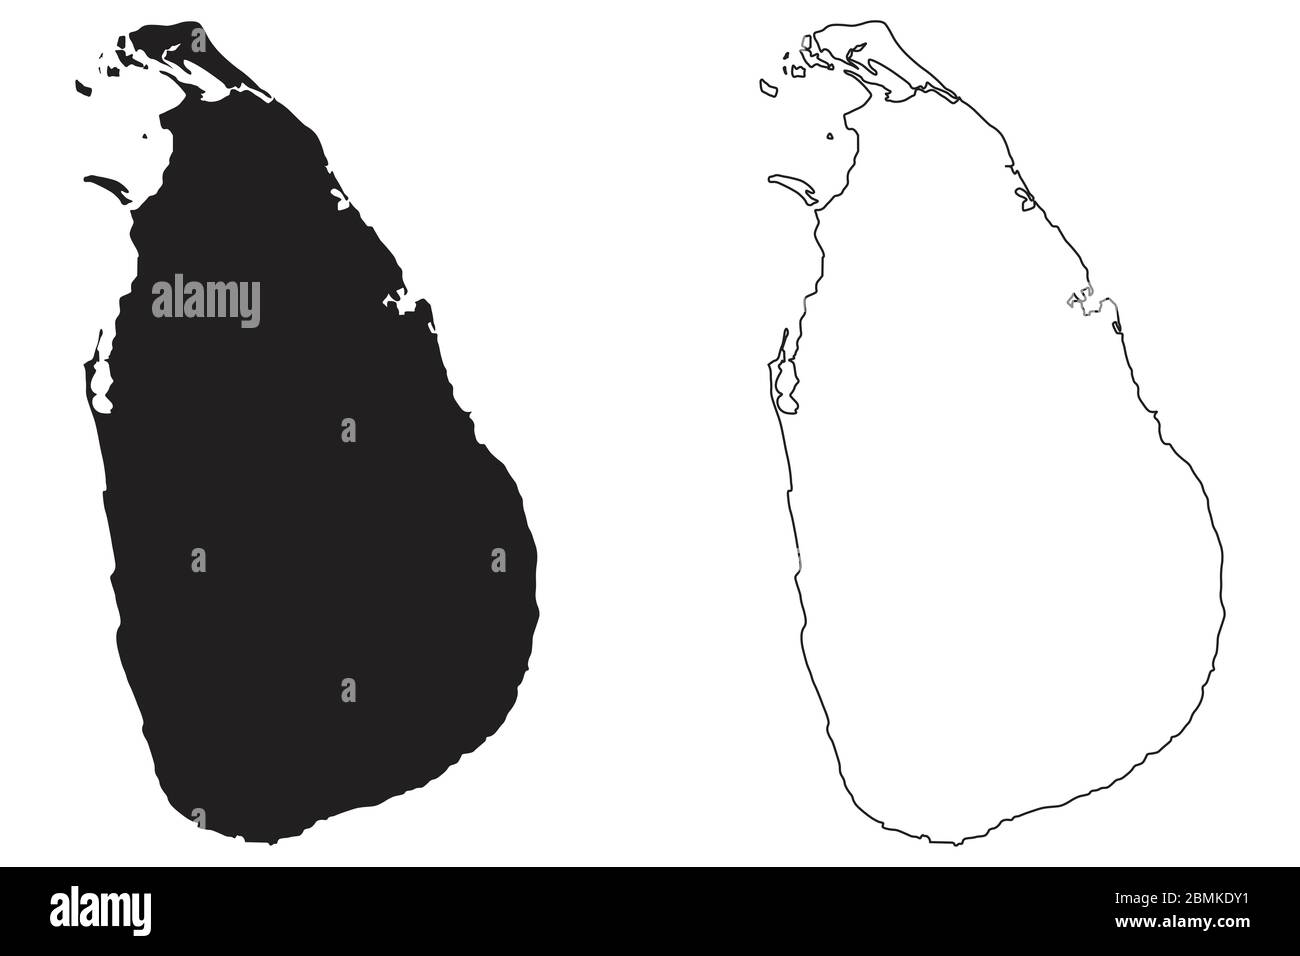 Sri Lanka Country Map. Black silhouette and outline isolated on white background. EPS Vector Stock Vector